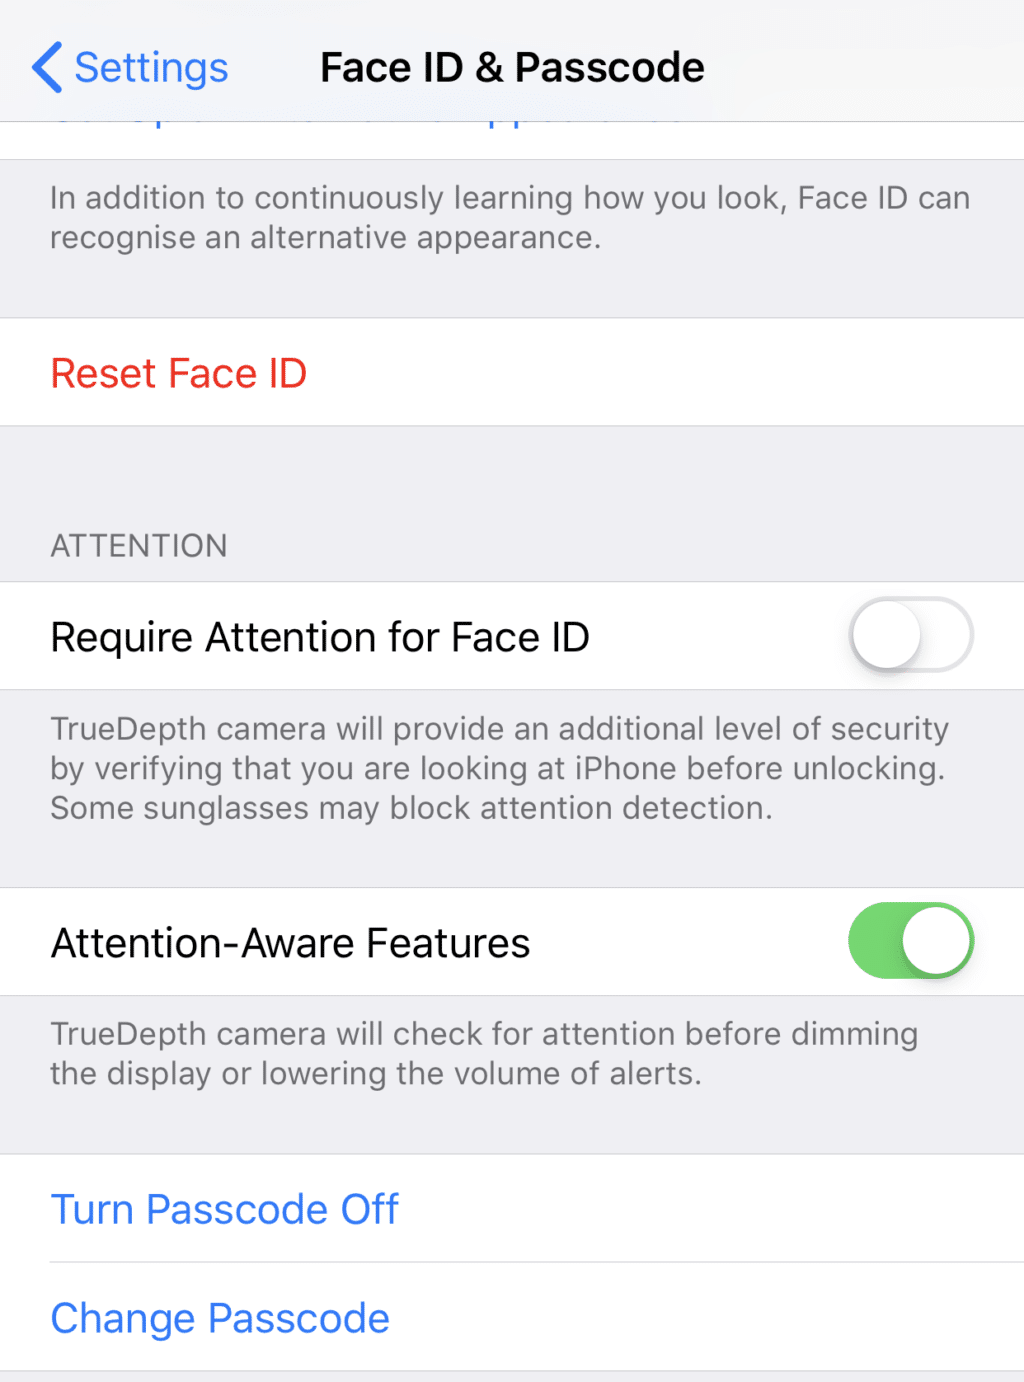 How to Fix Face ID Problems on iPhone XS, iPhone XS Max, and iPhone XR?